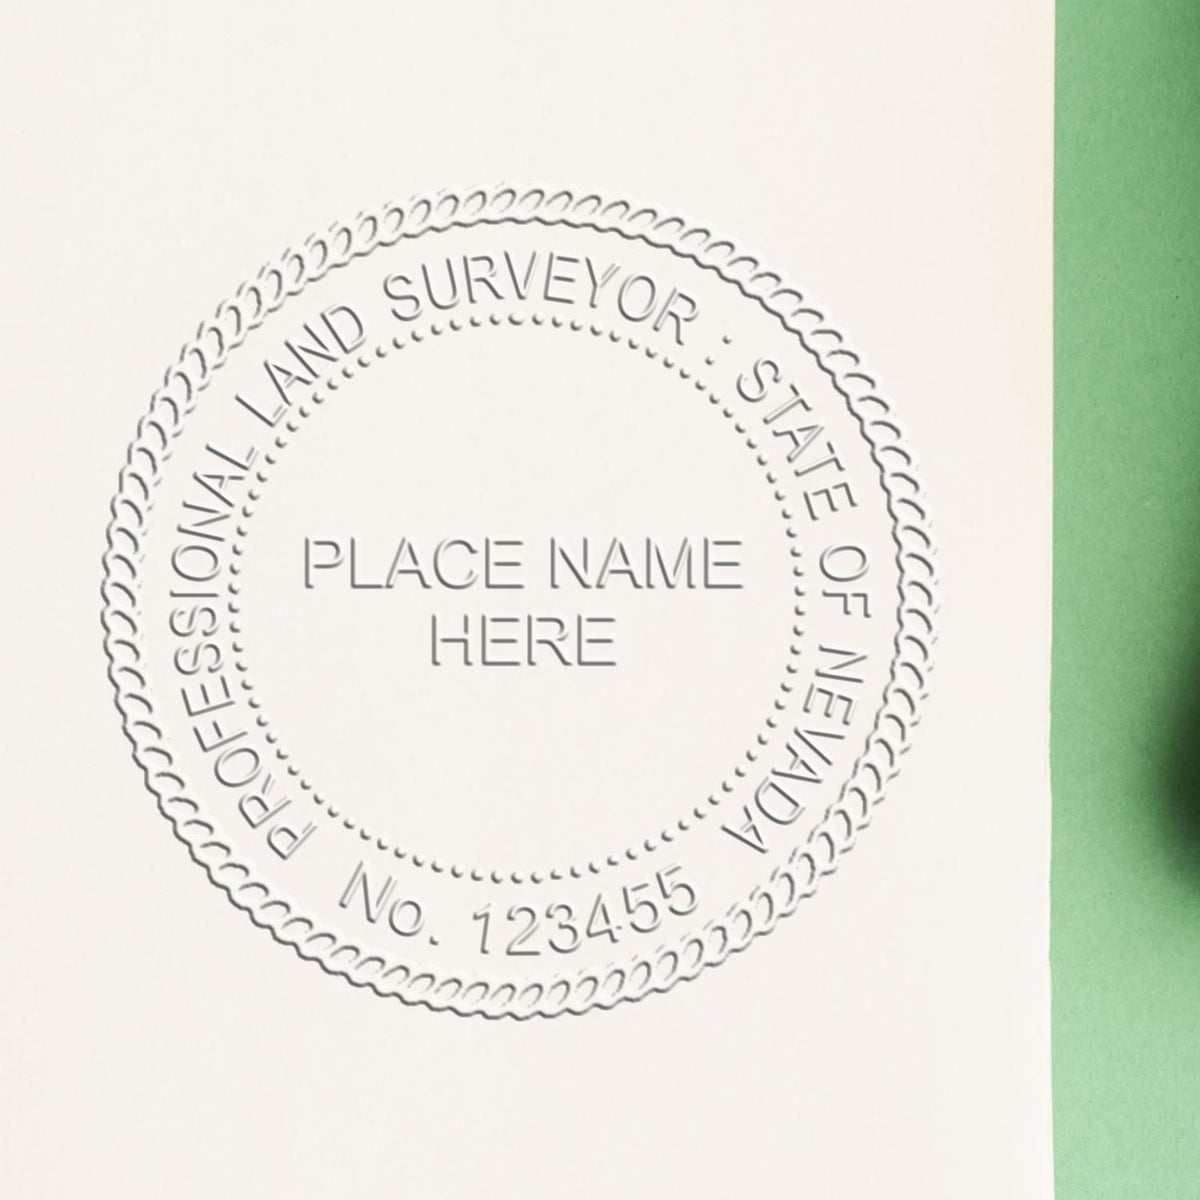 The Gift Nevada Land Surveyor Seal stamp impression comes to life with a crisp, detailed image stamped on paper - showcasing true professional quality.